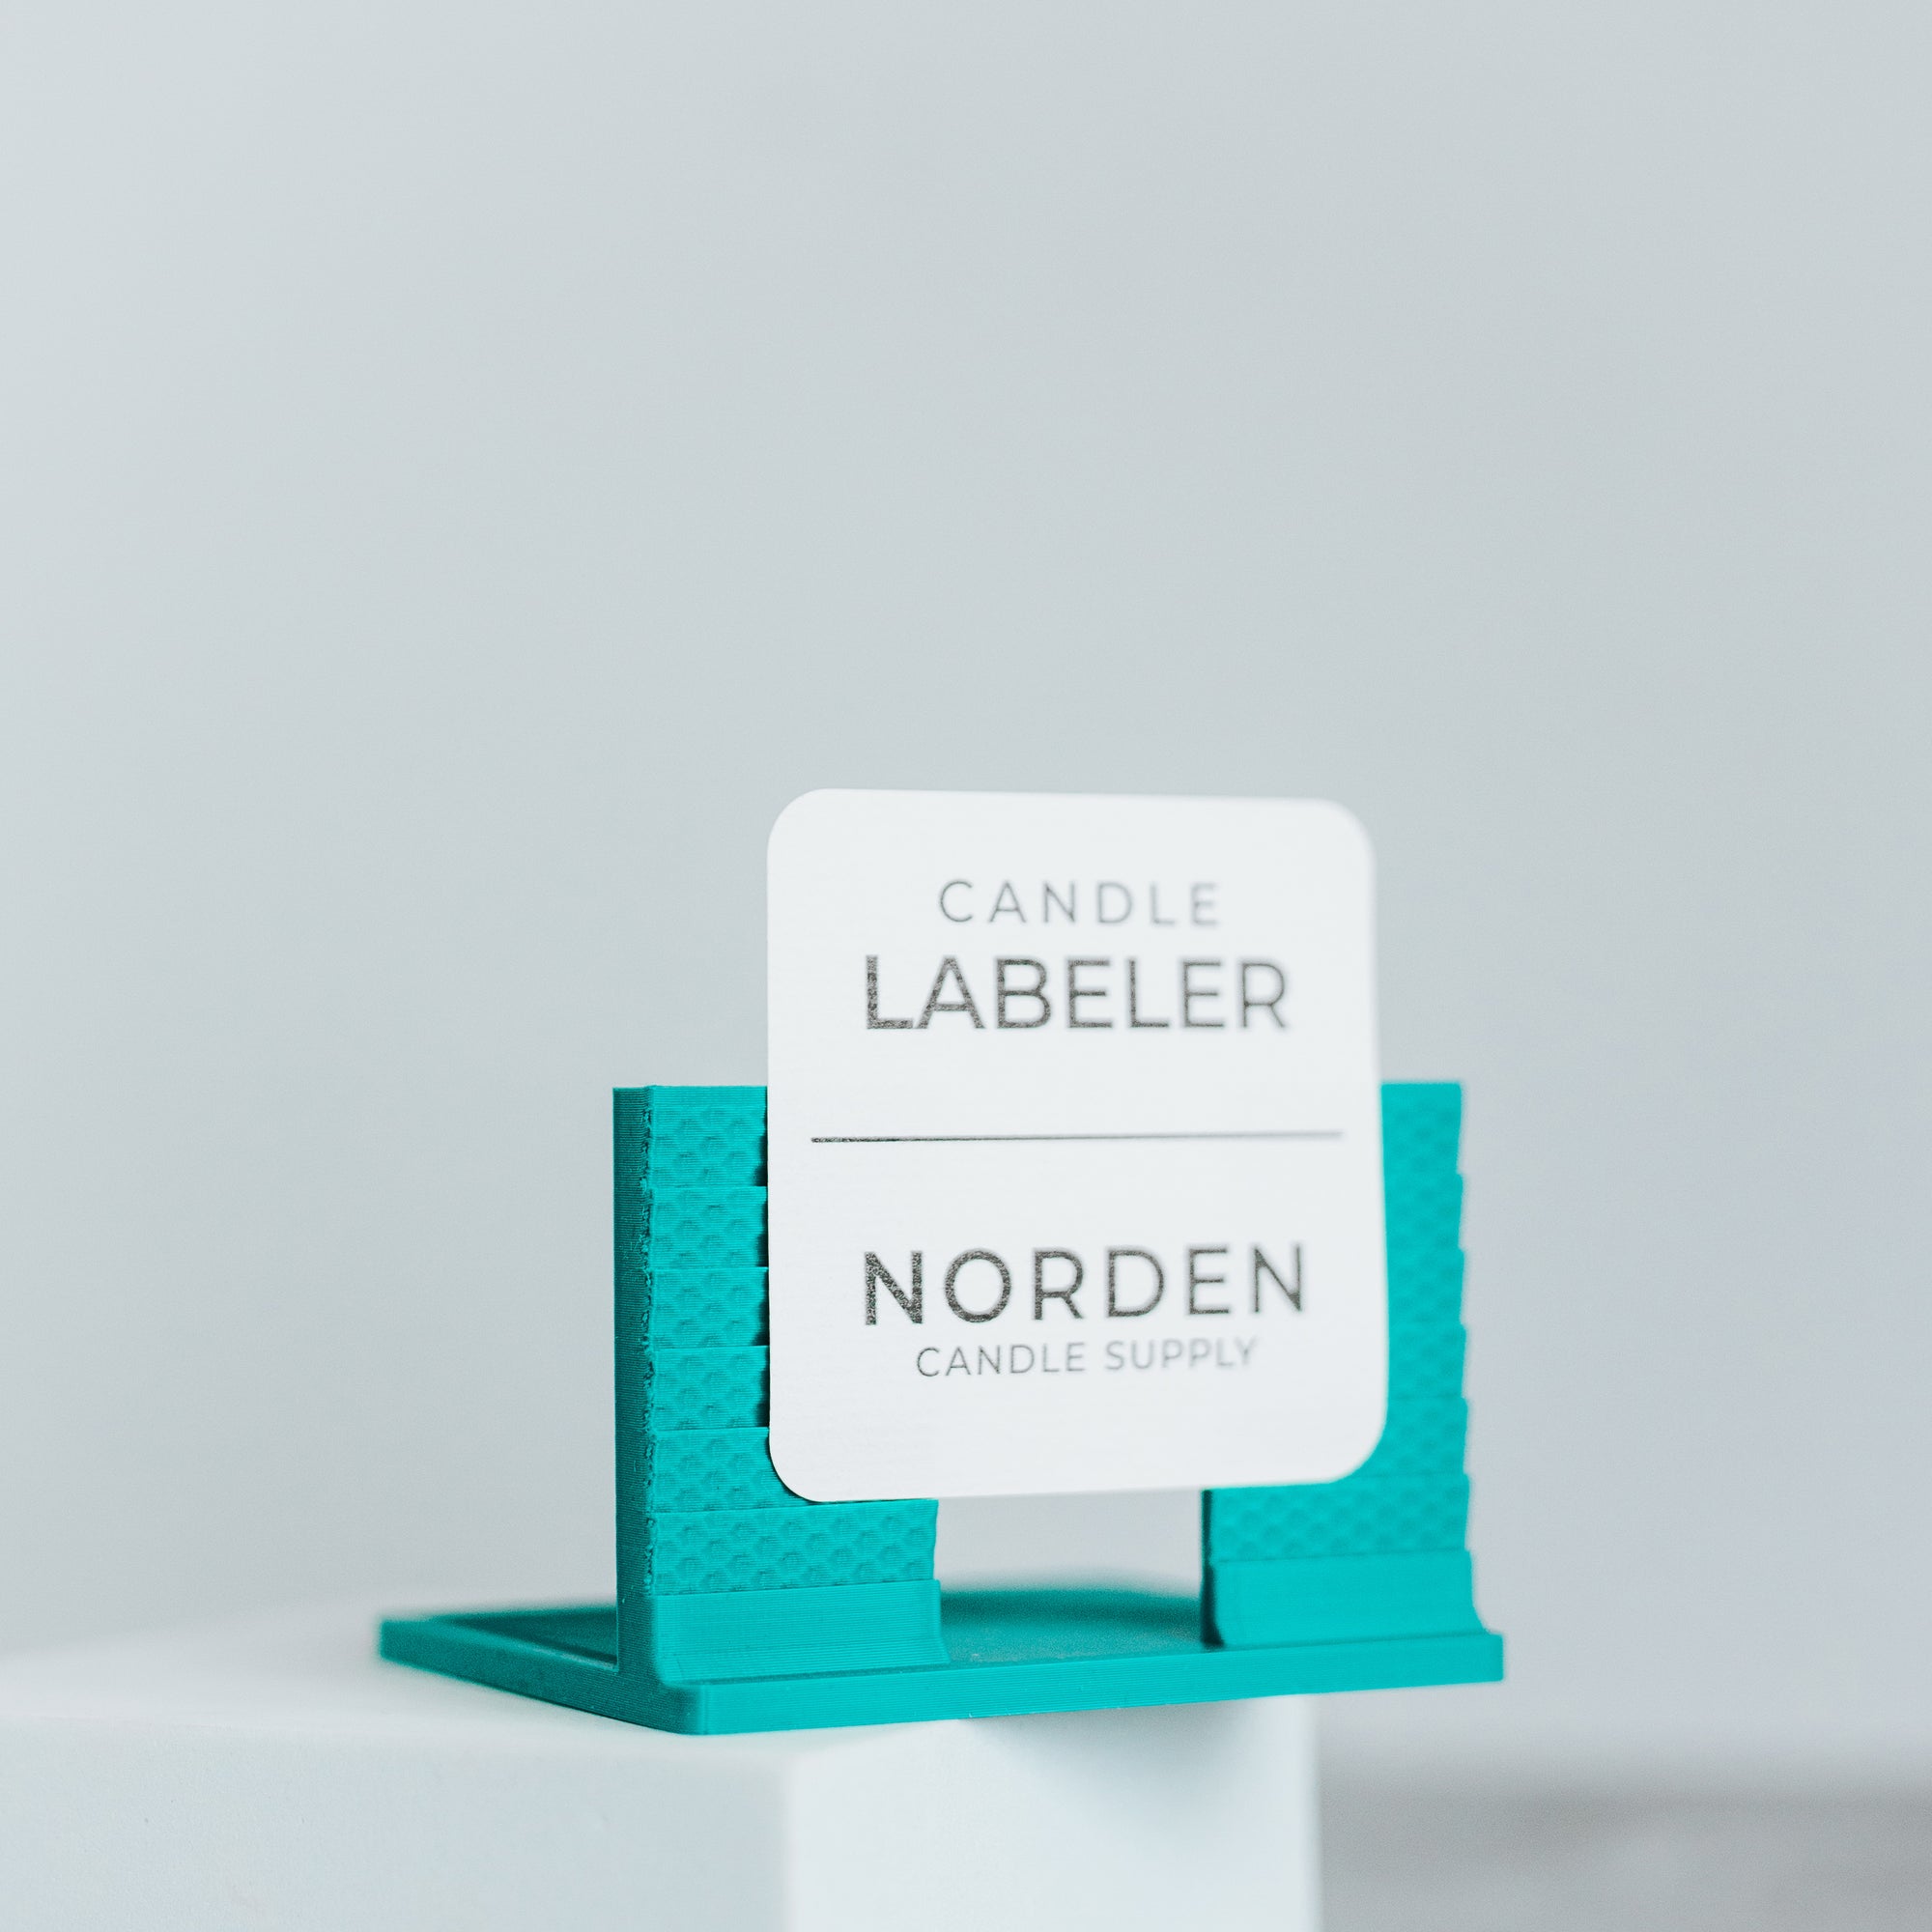 Candle Labeler  Norden Candle Supply